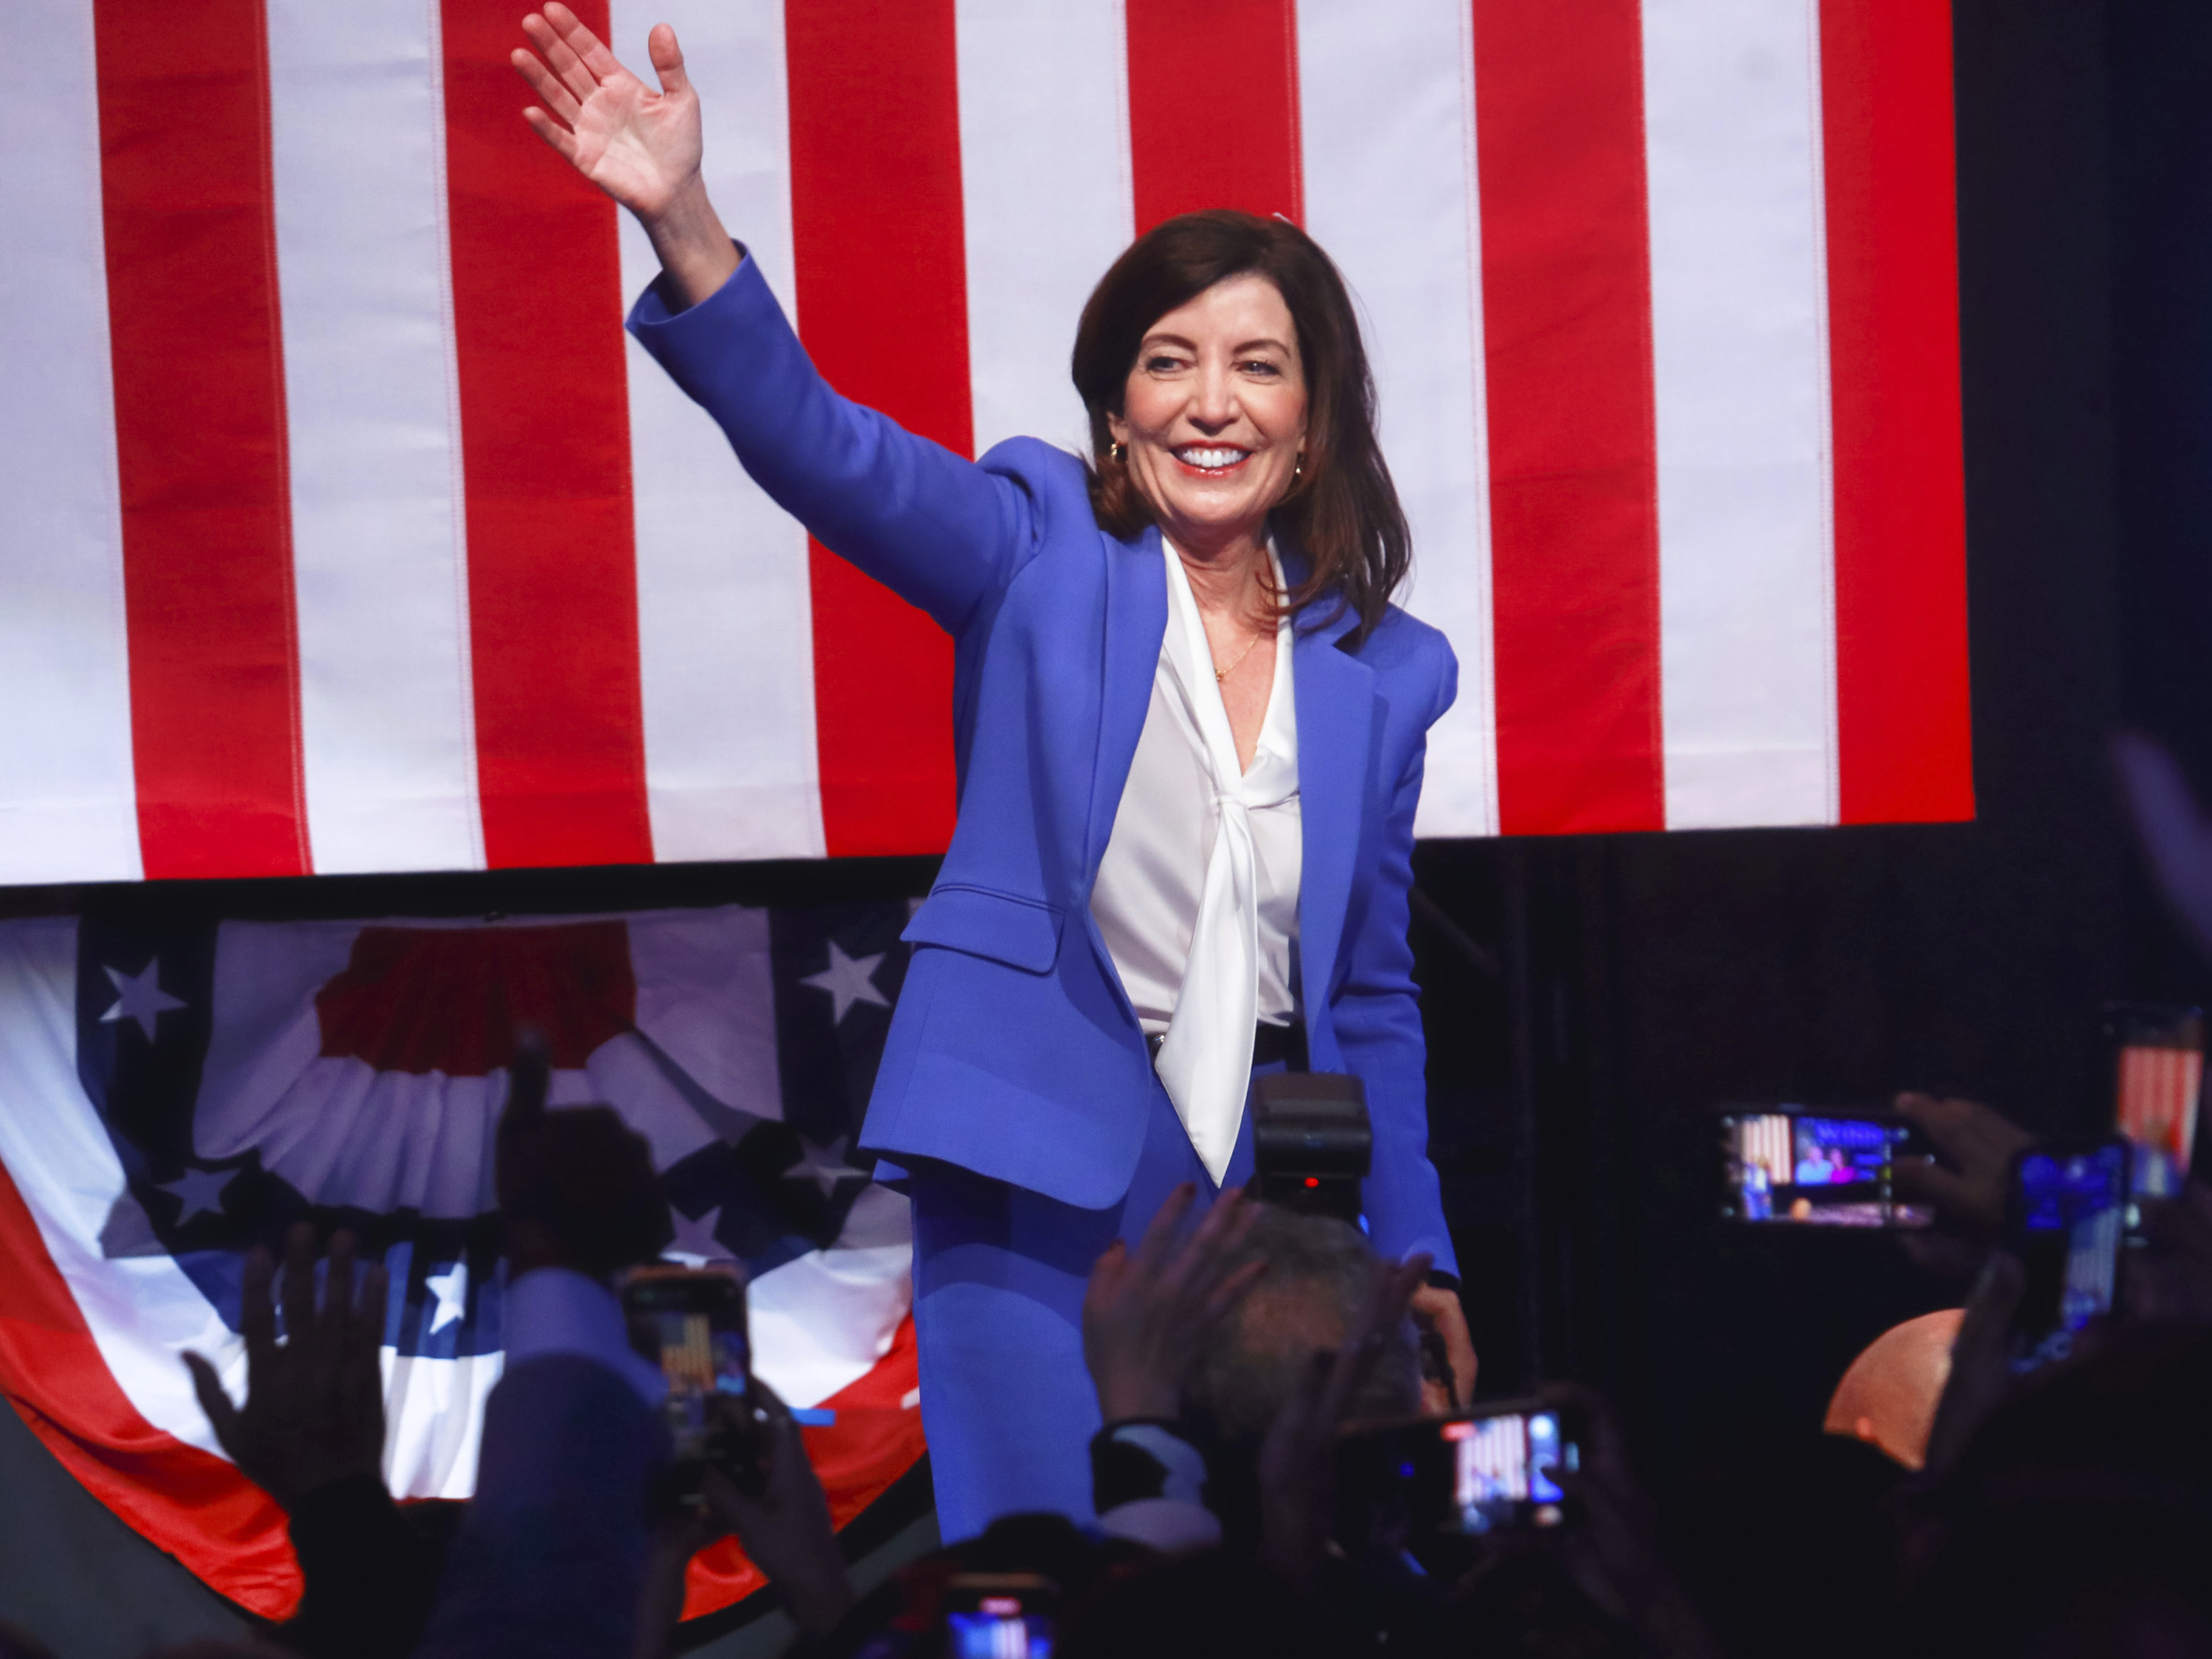 New York Gov. Kathy Hochul speaks to supporters after her win during an election night party in New York City, on November 8.